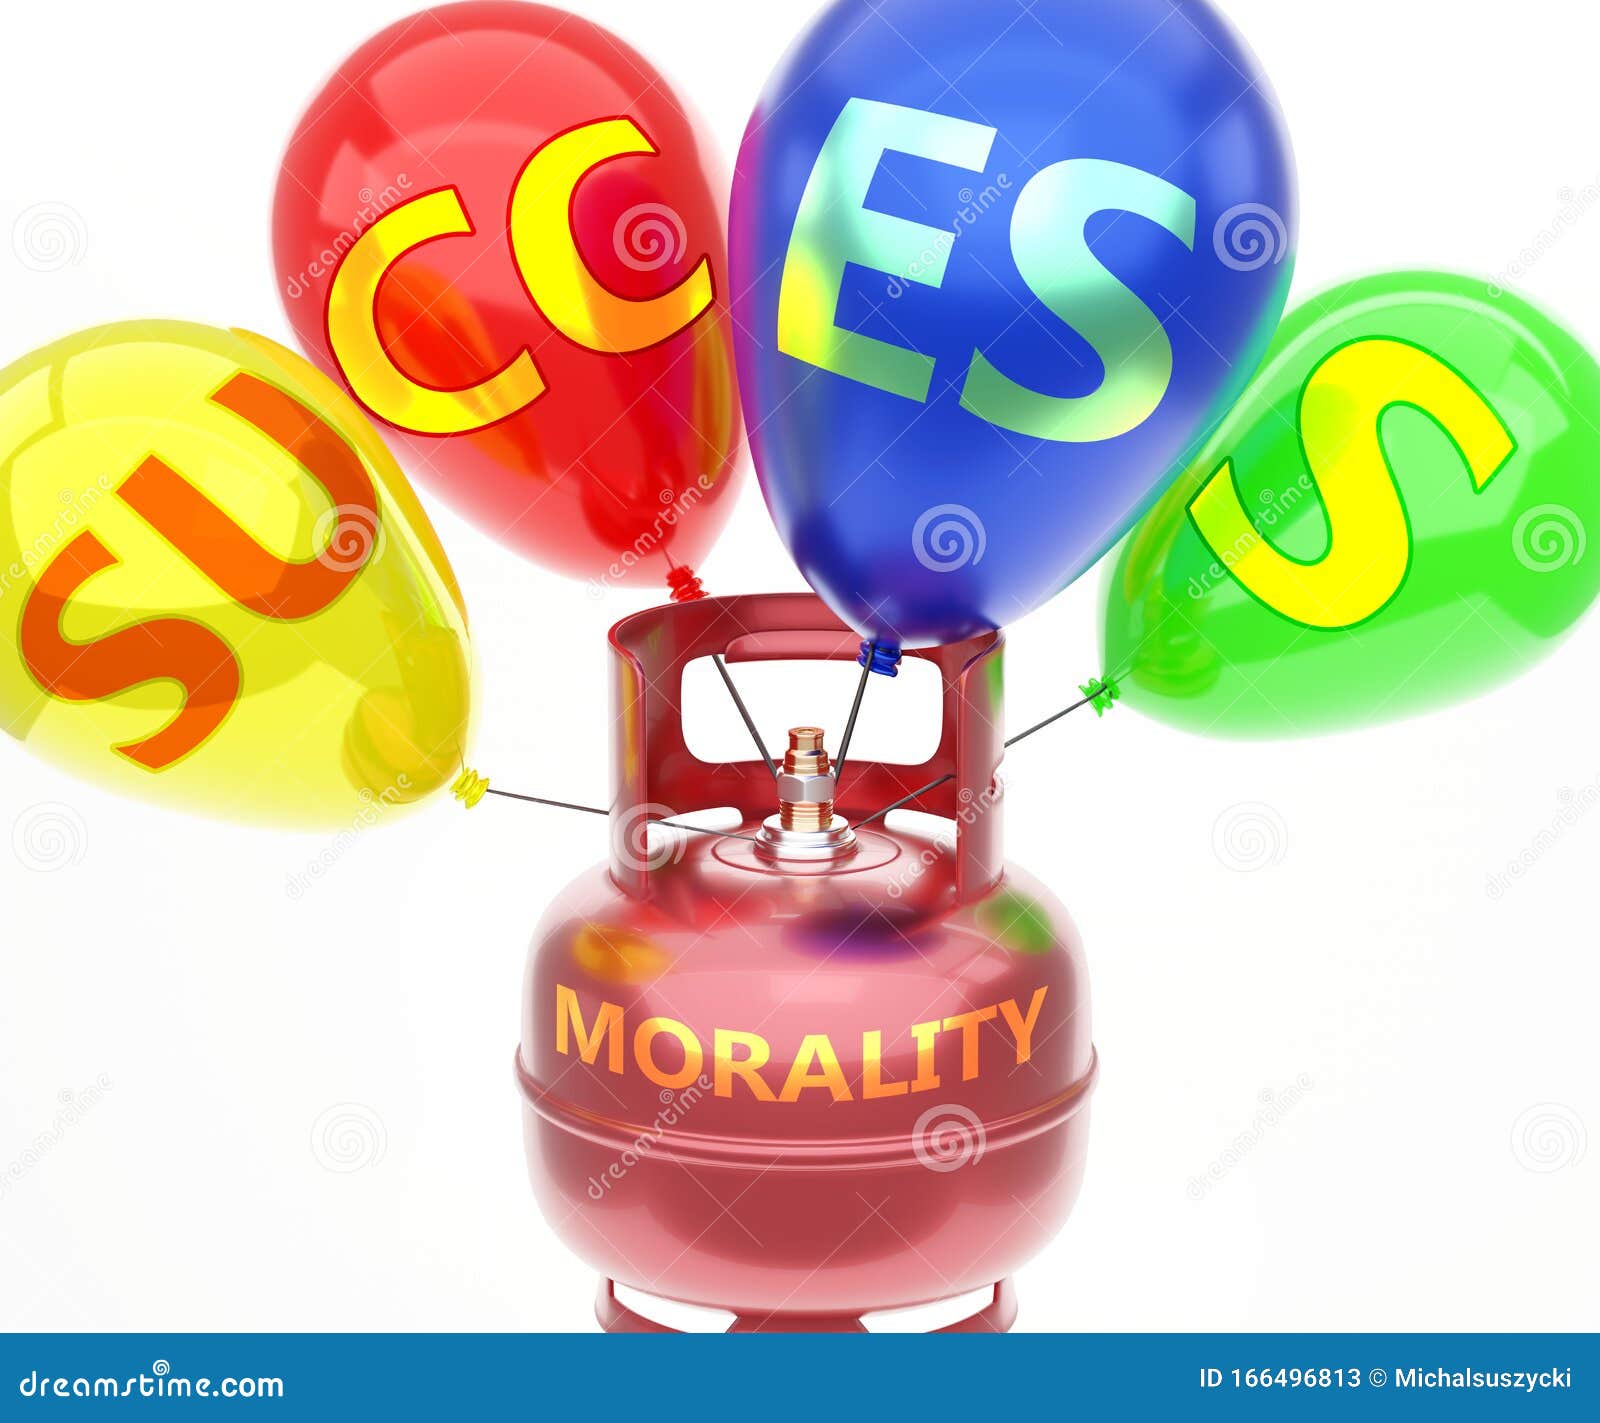 Morality and Success